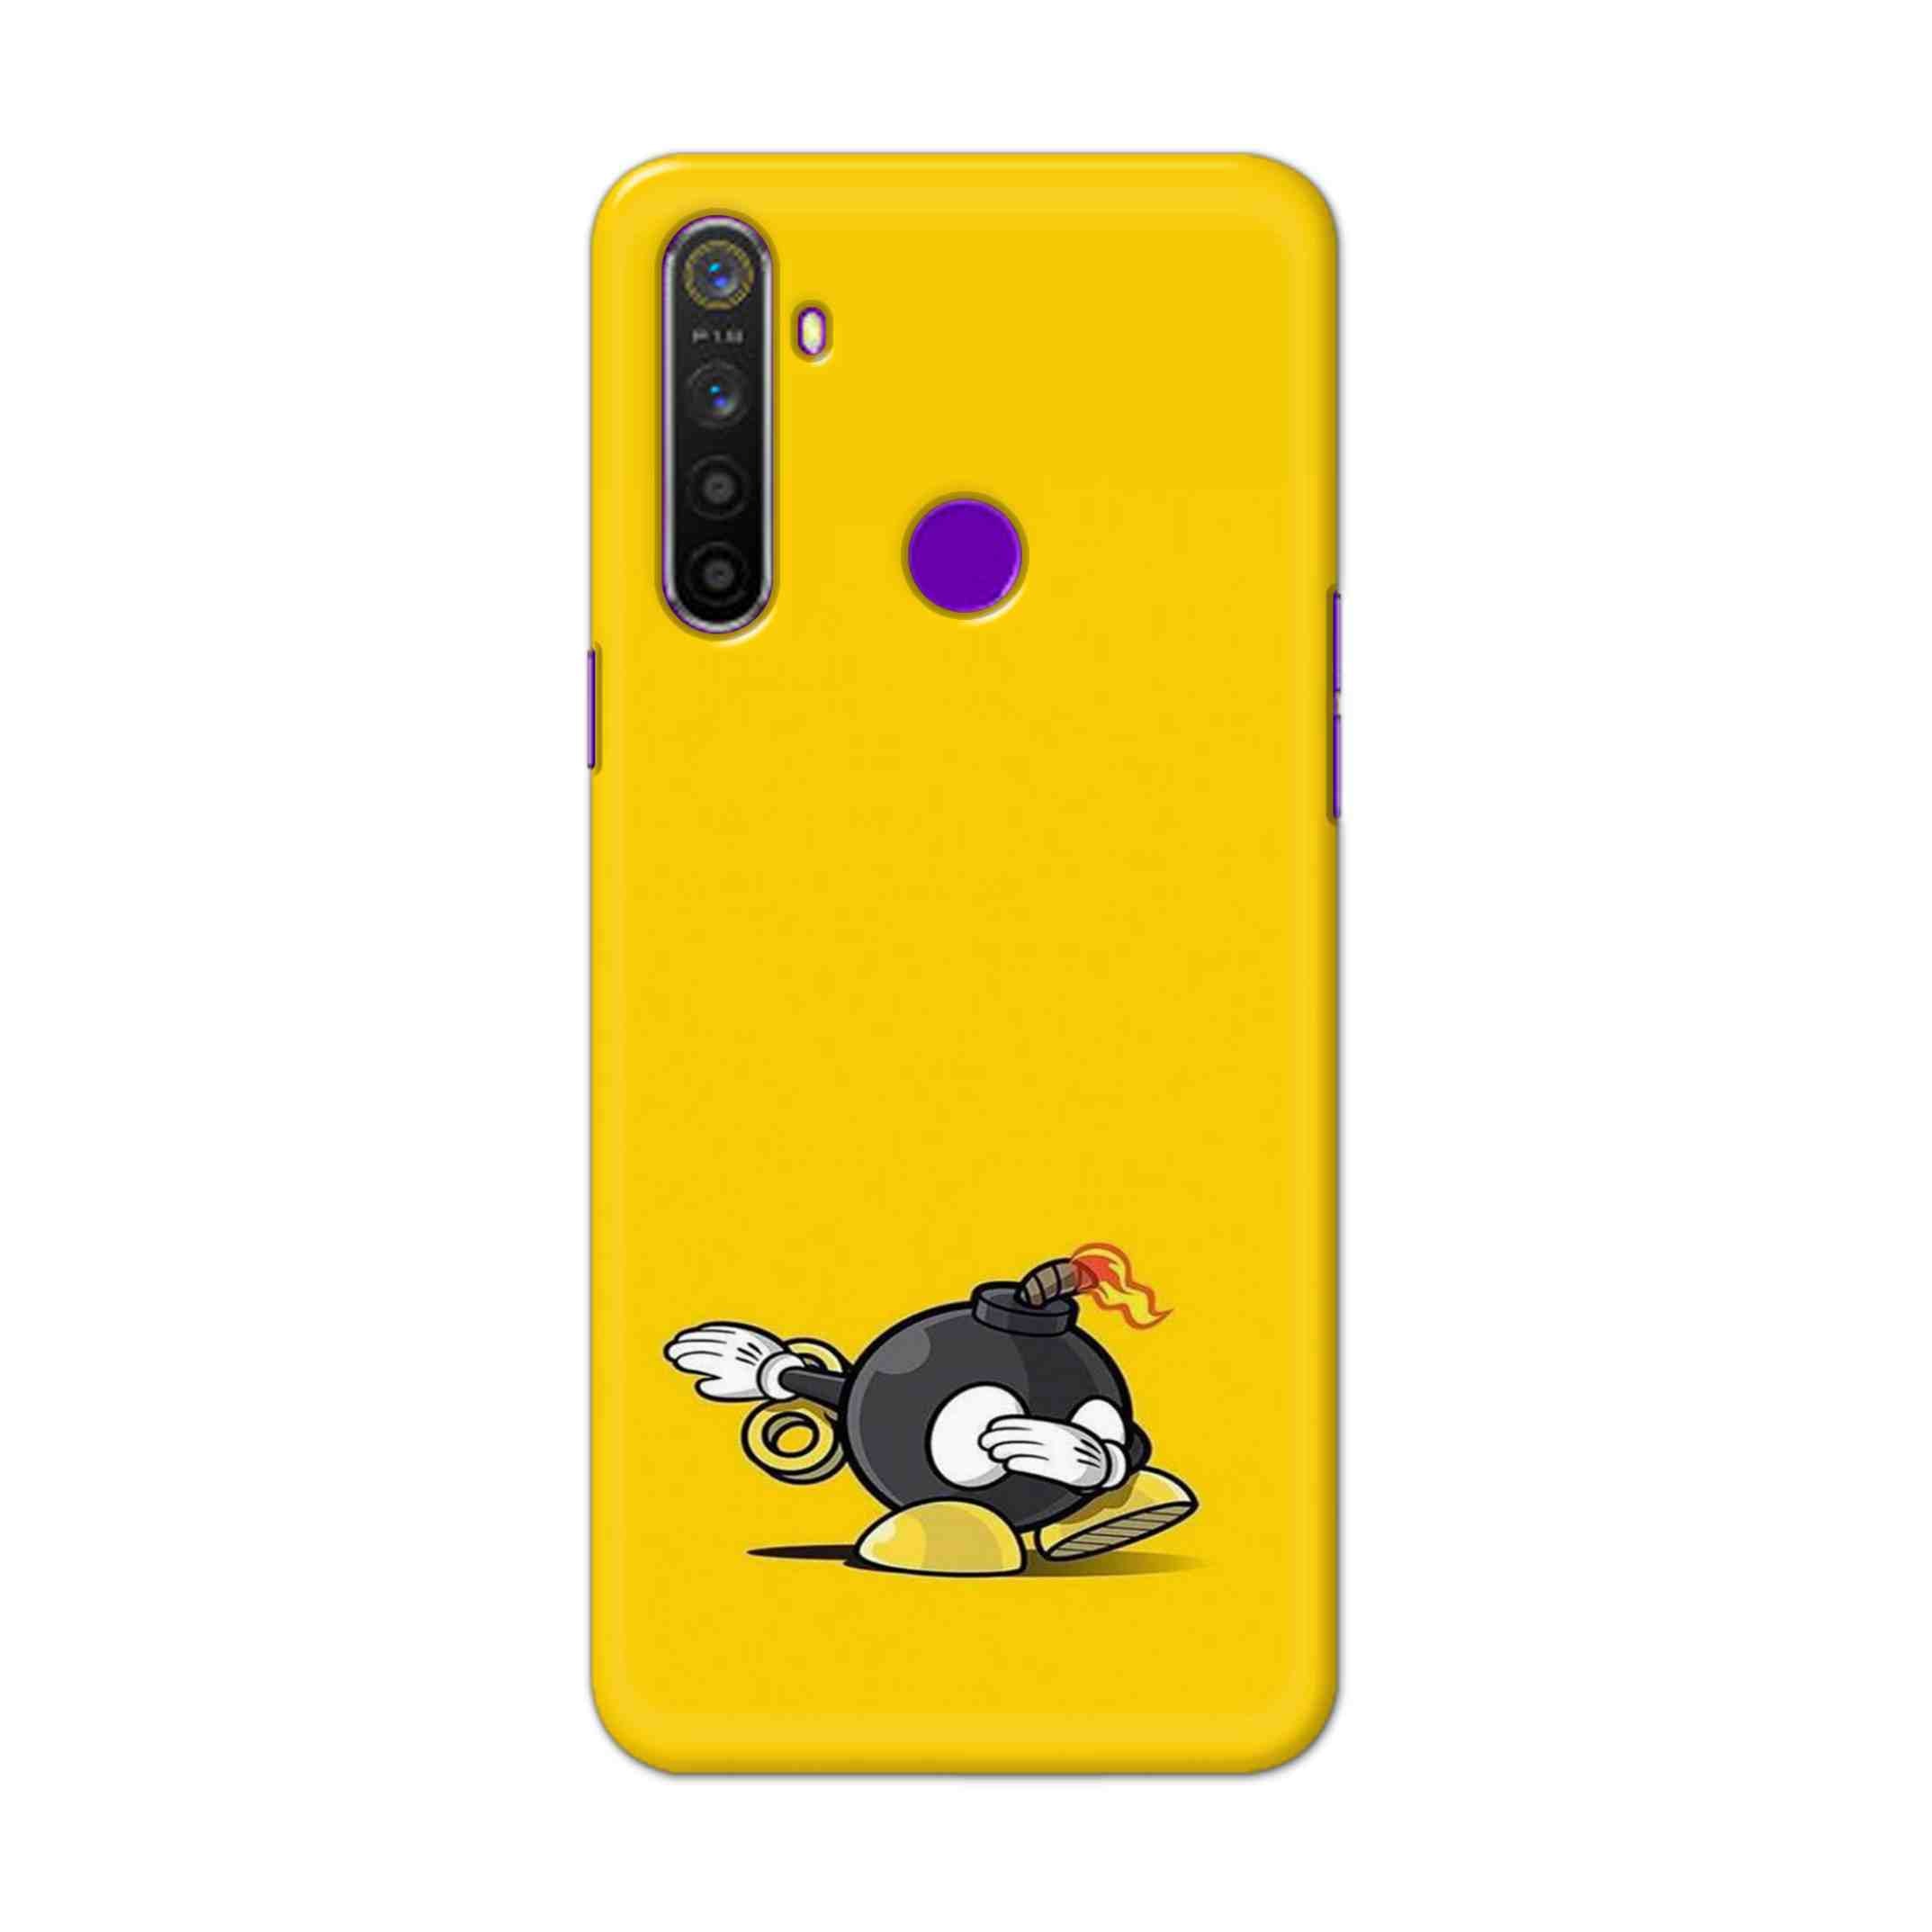 Buy Dashing Bomb Hard Back Mobile Phone Case Cover For Realme 5 Pro Online